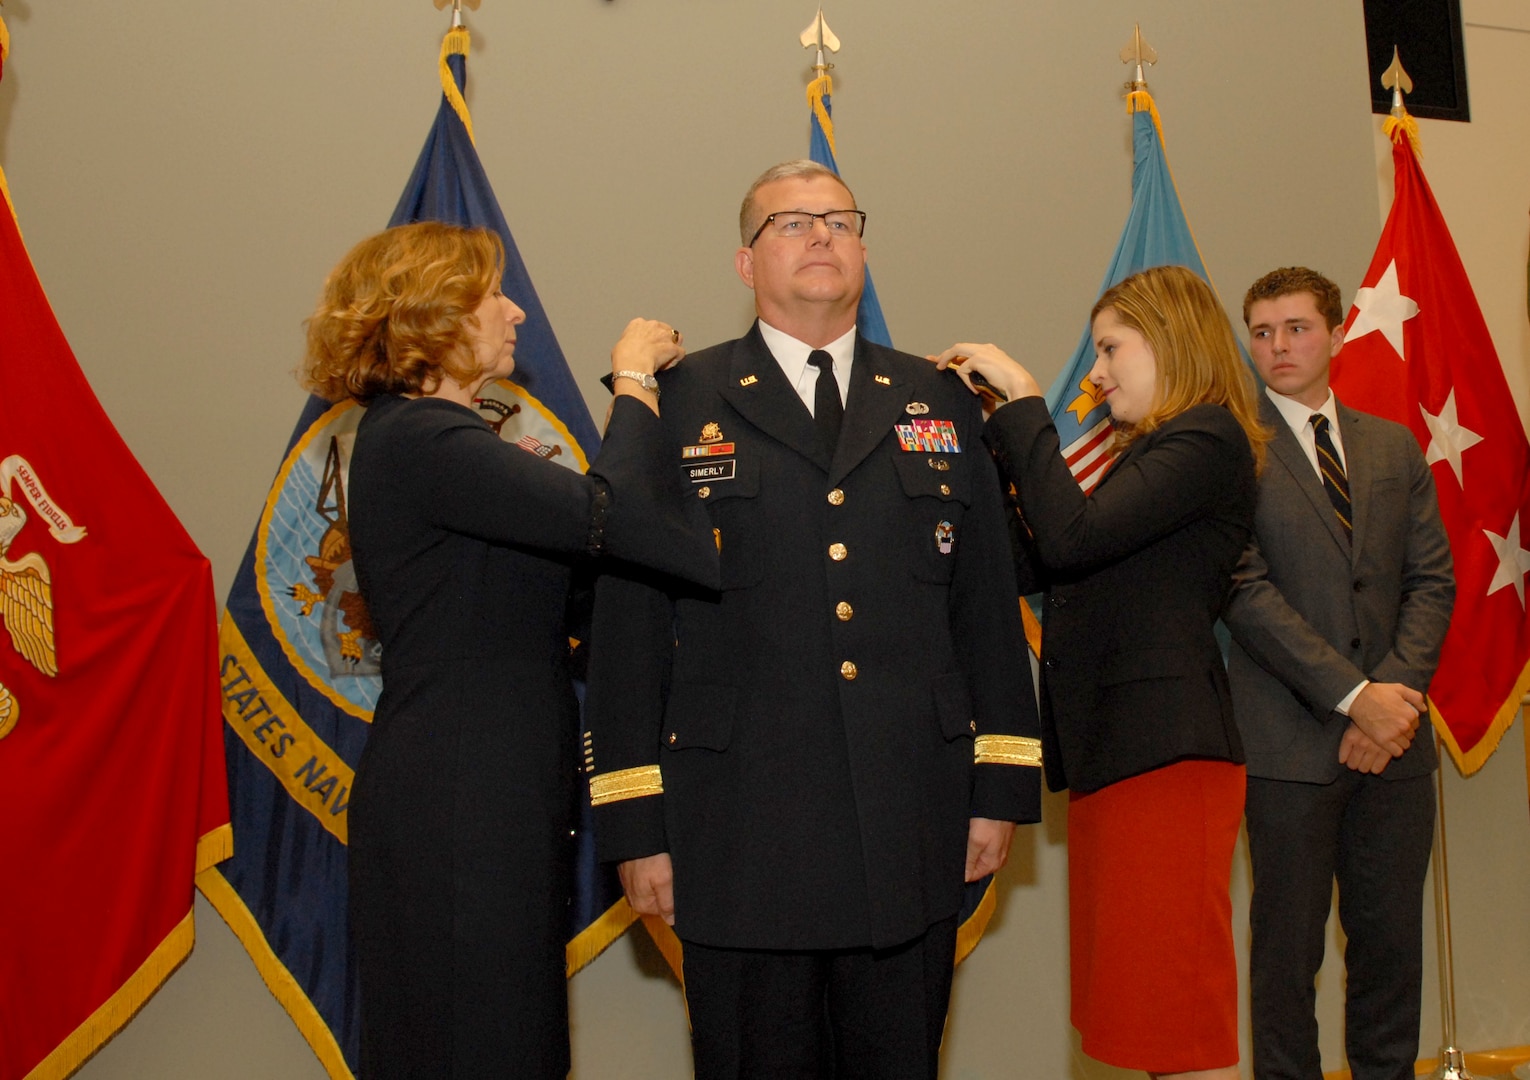 Troop Support commander promoted to brigadier general